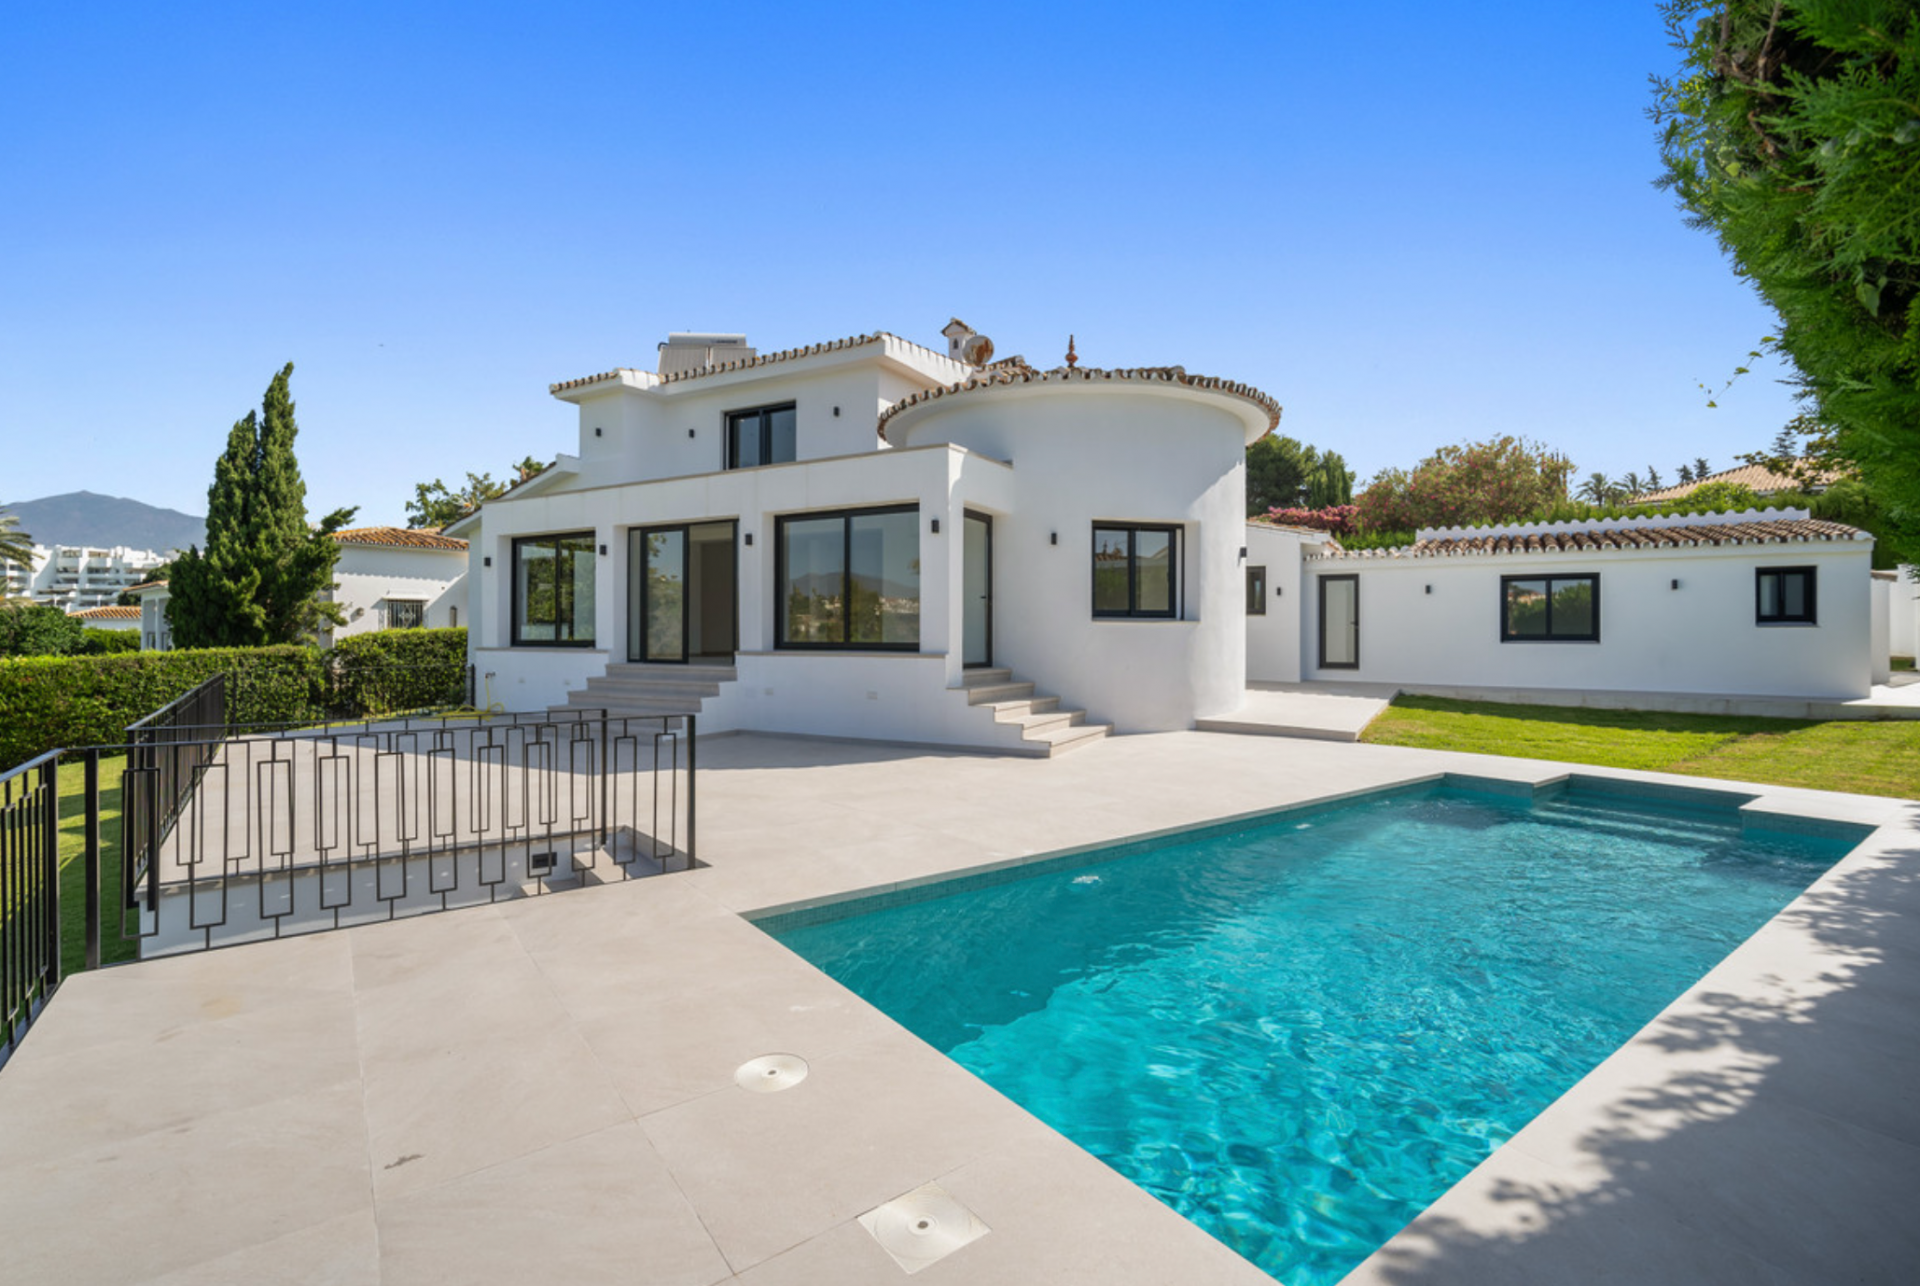 West facing, recently refurbished villa designed in a modern style and located next to the Guadalmina Golf Course